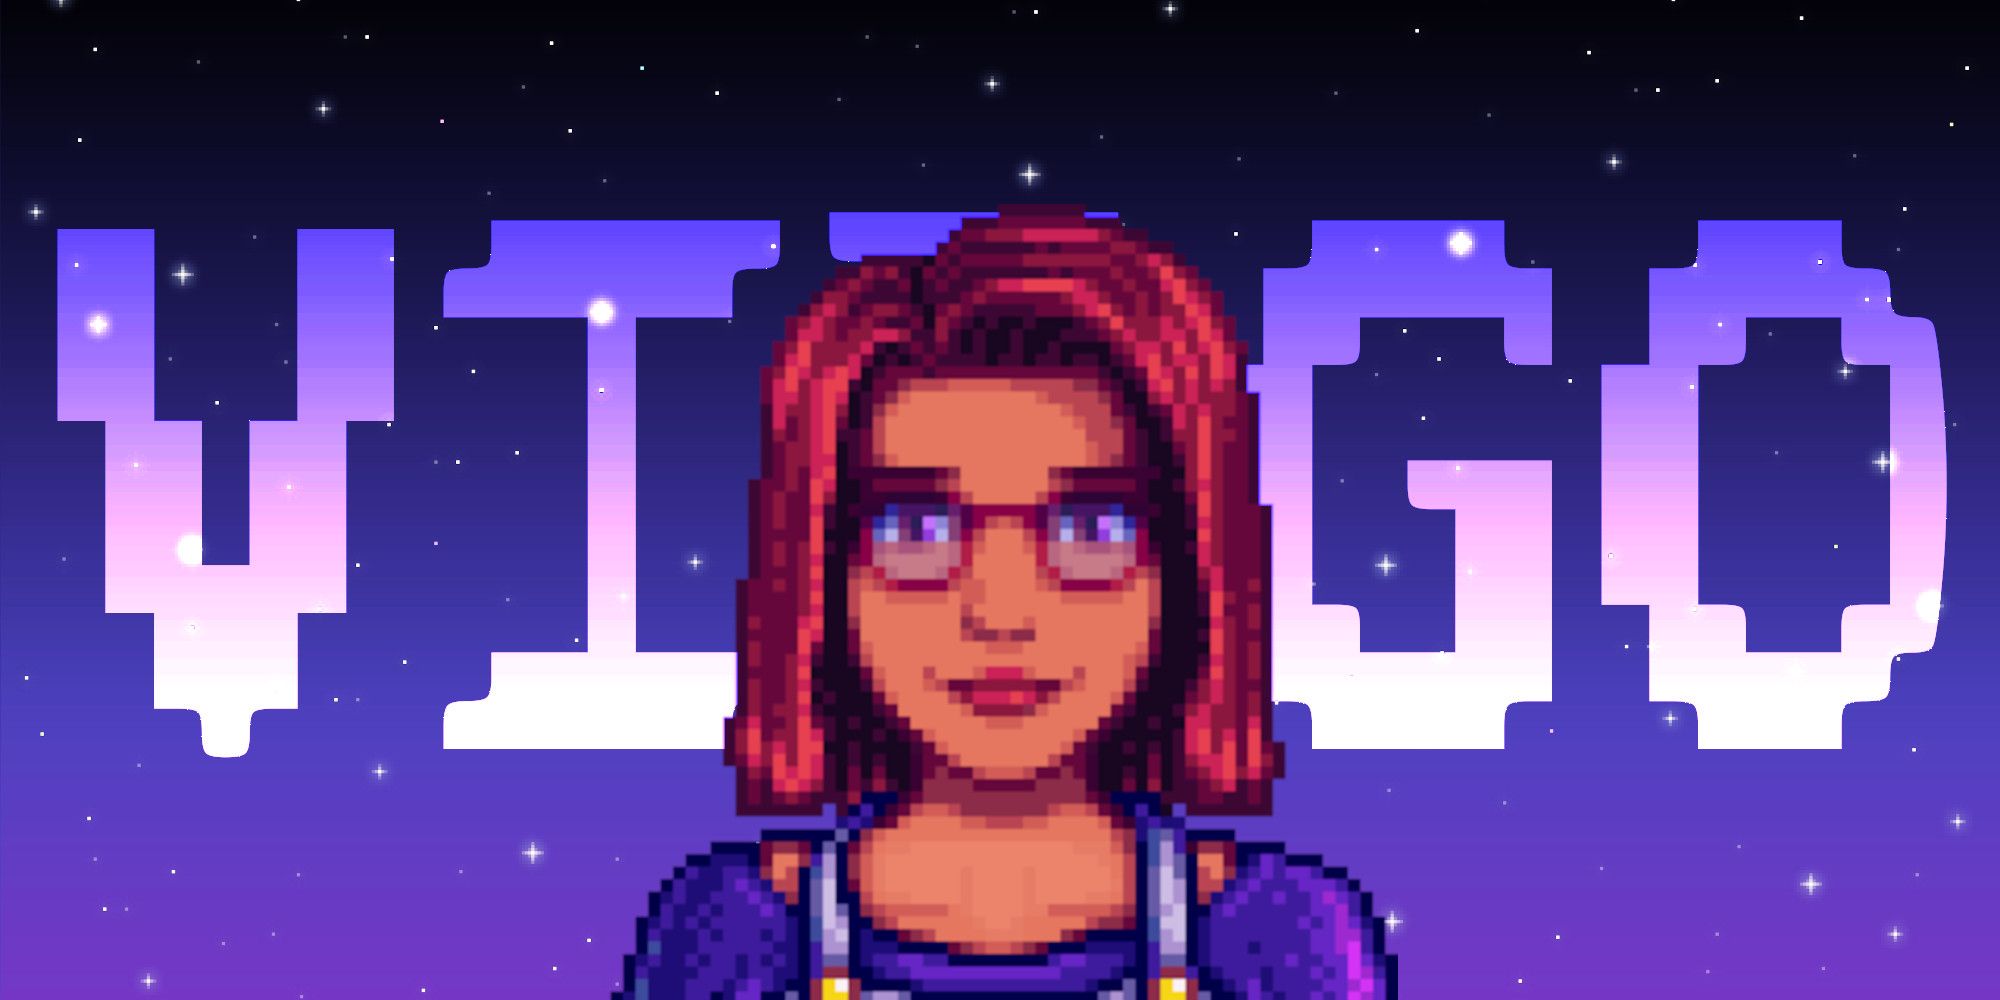 Maru from Stardew Valley in front of a pixel star background and text reading %22Virgo%22